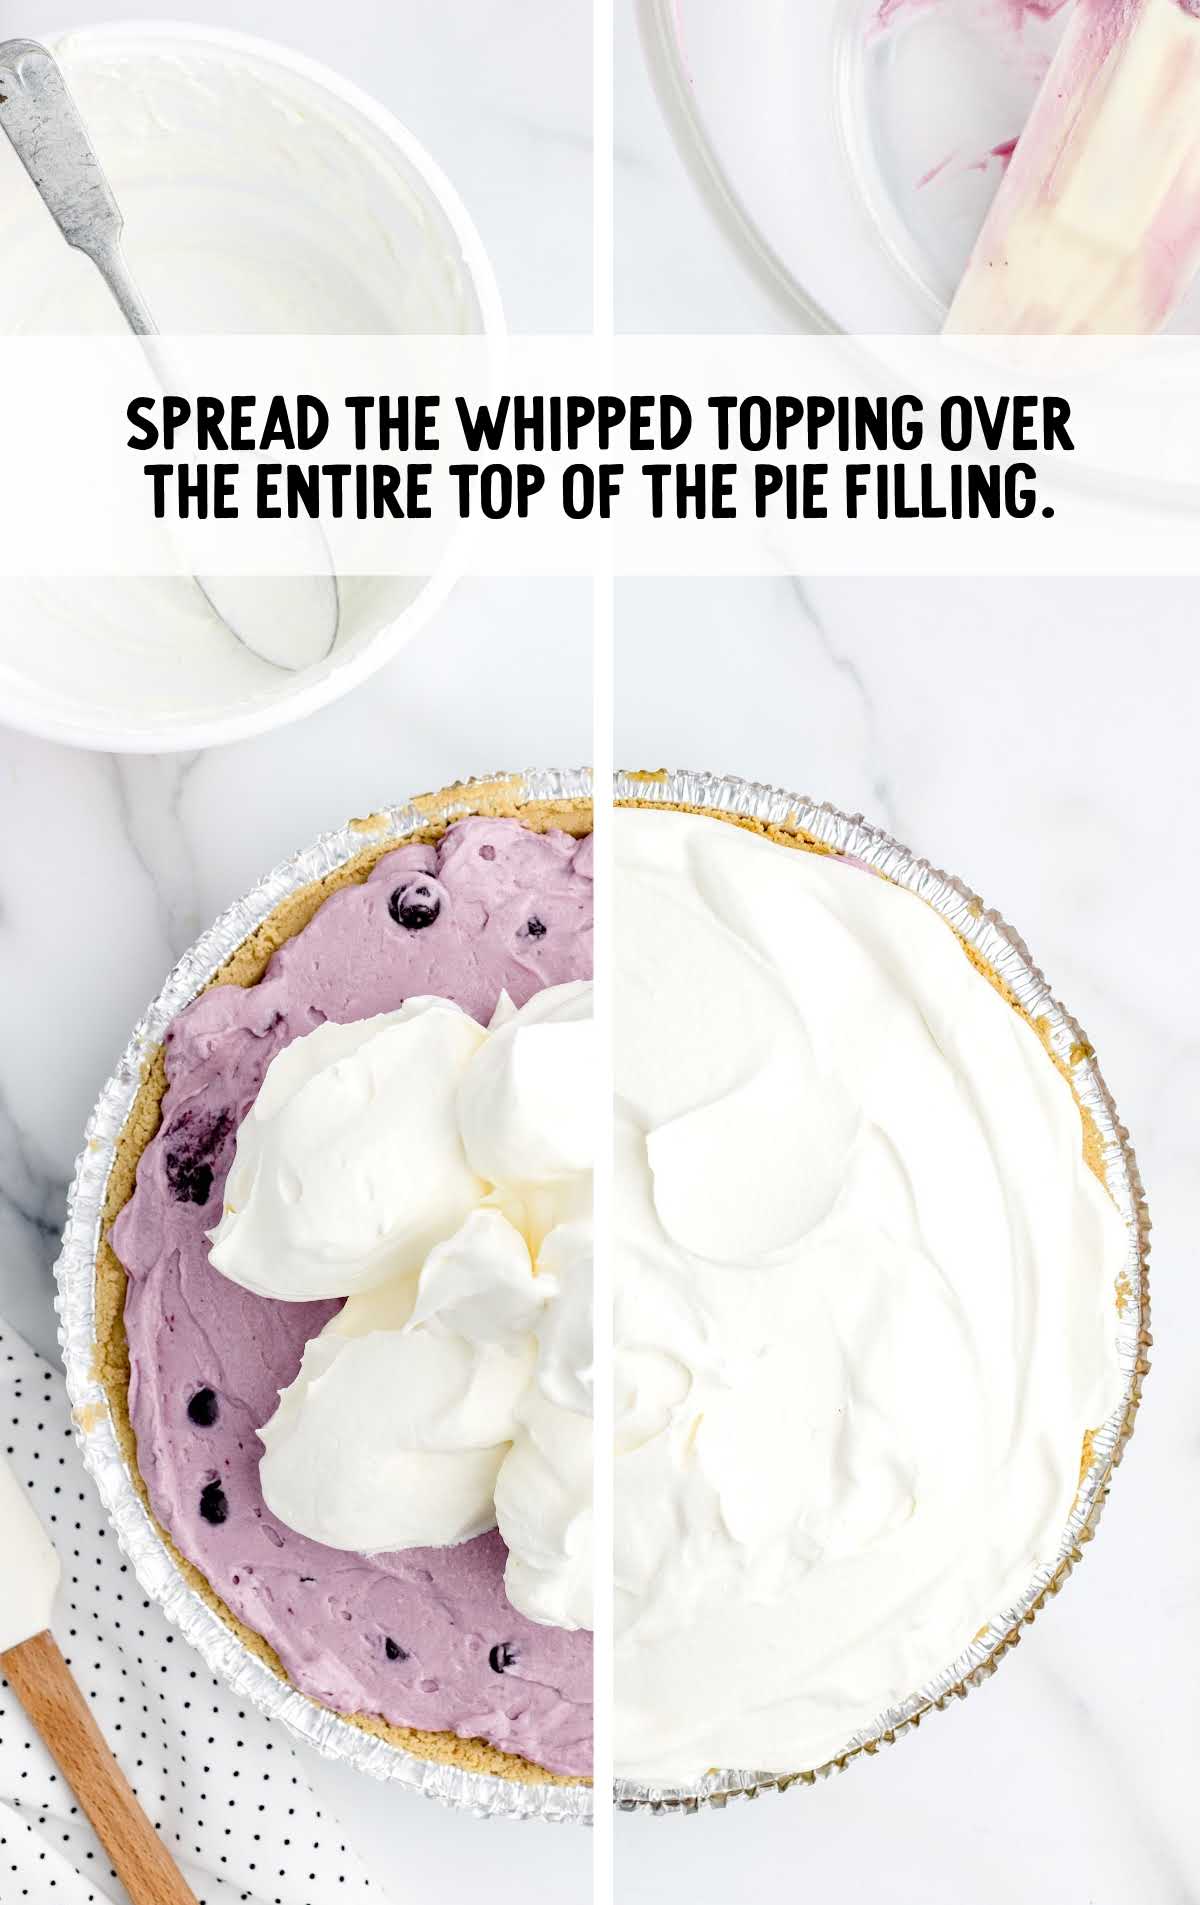 whipped topping spread over the pie filling